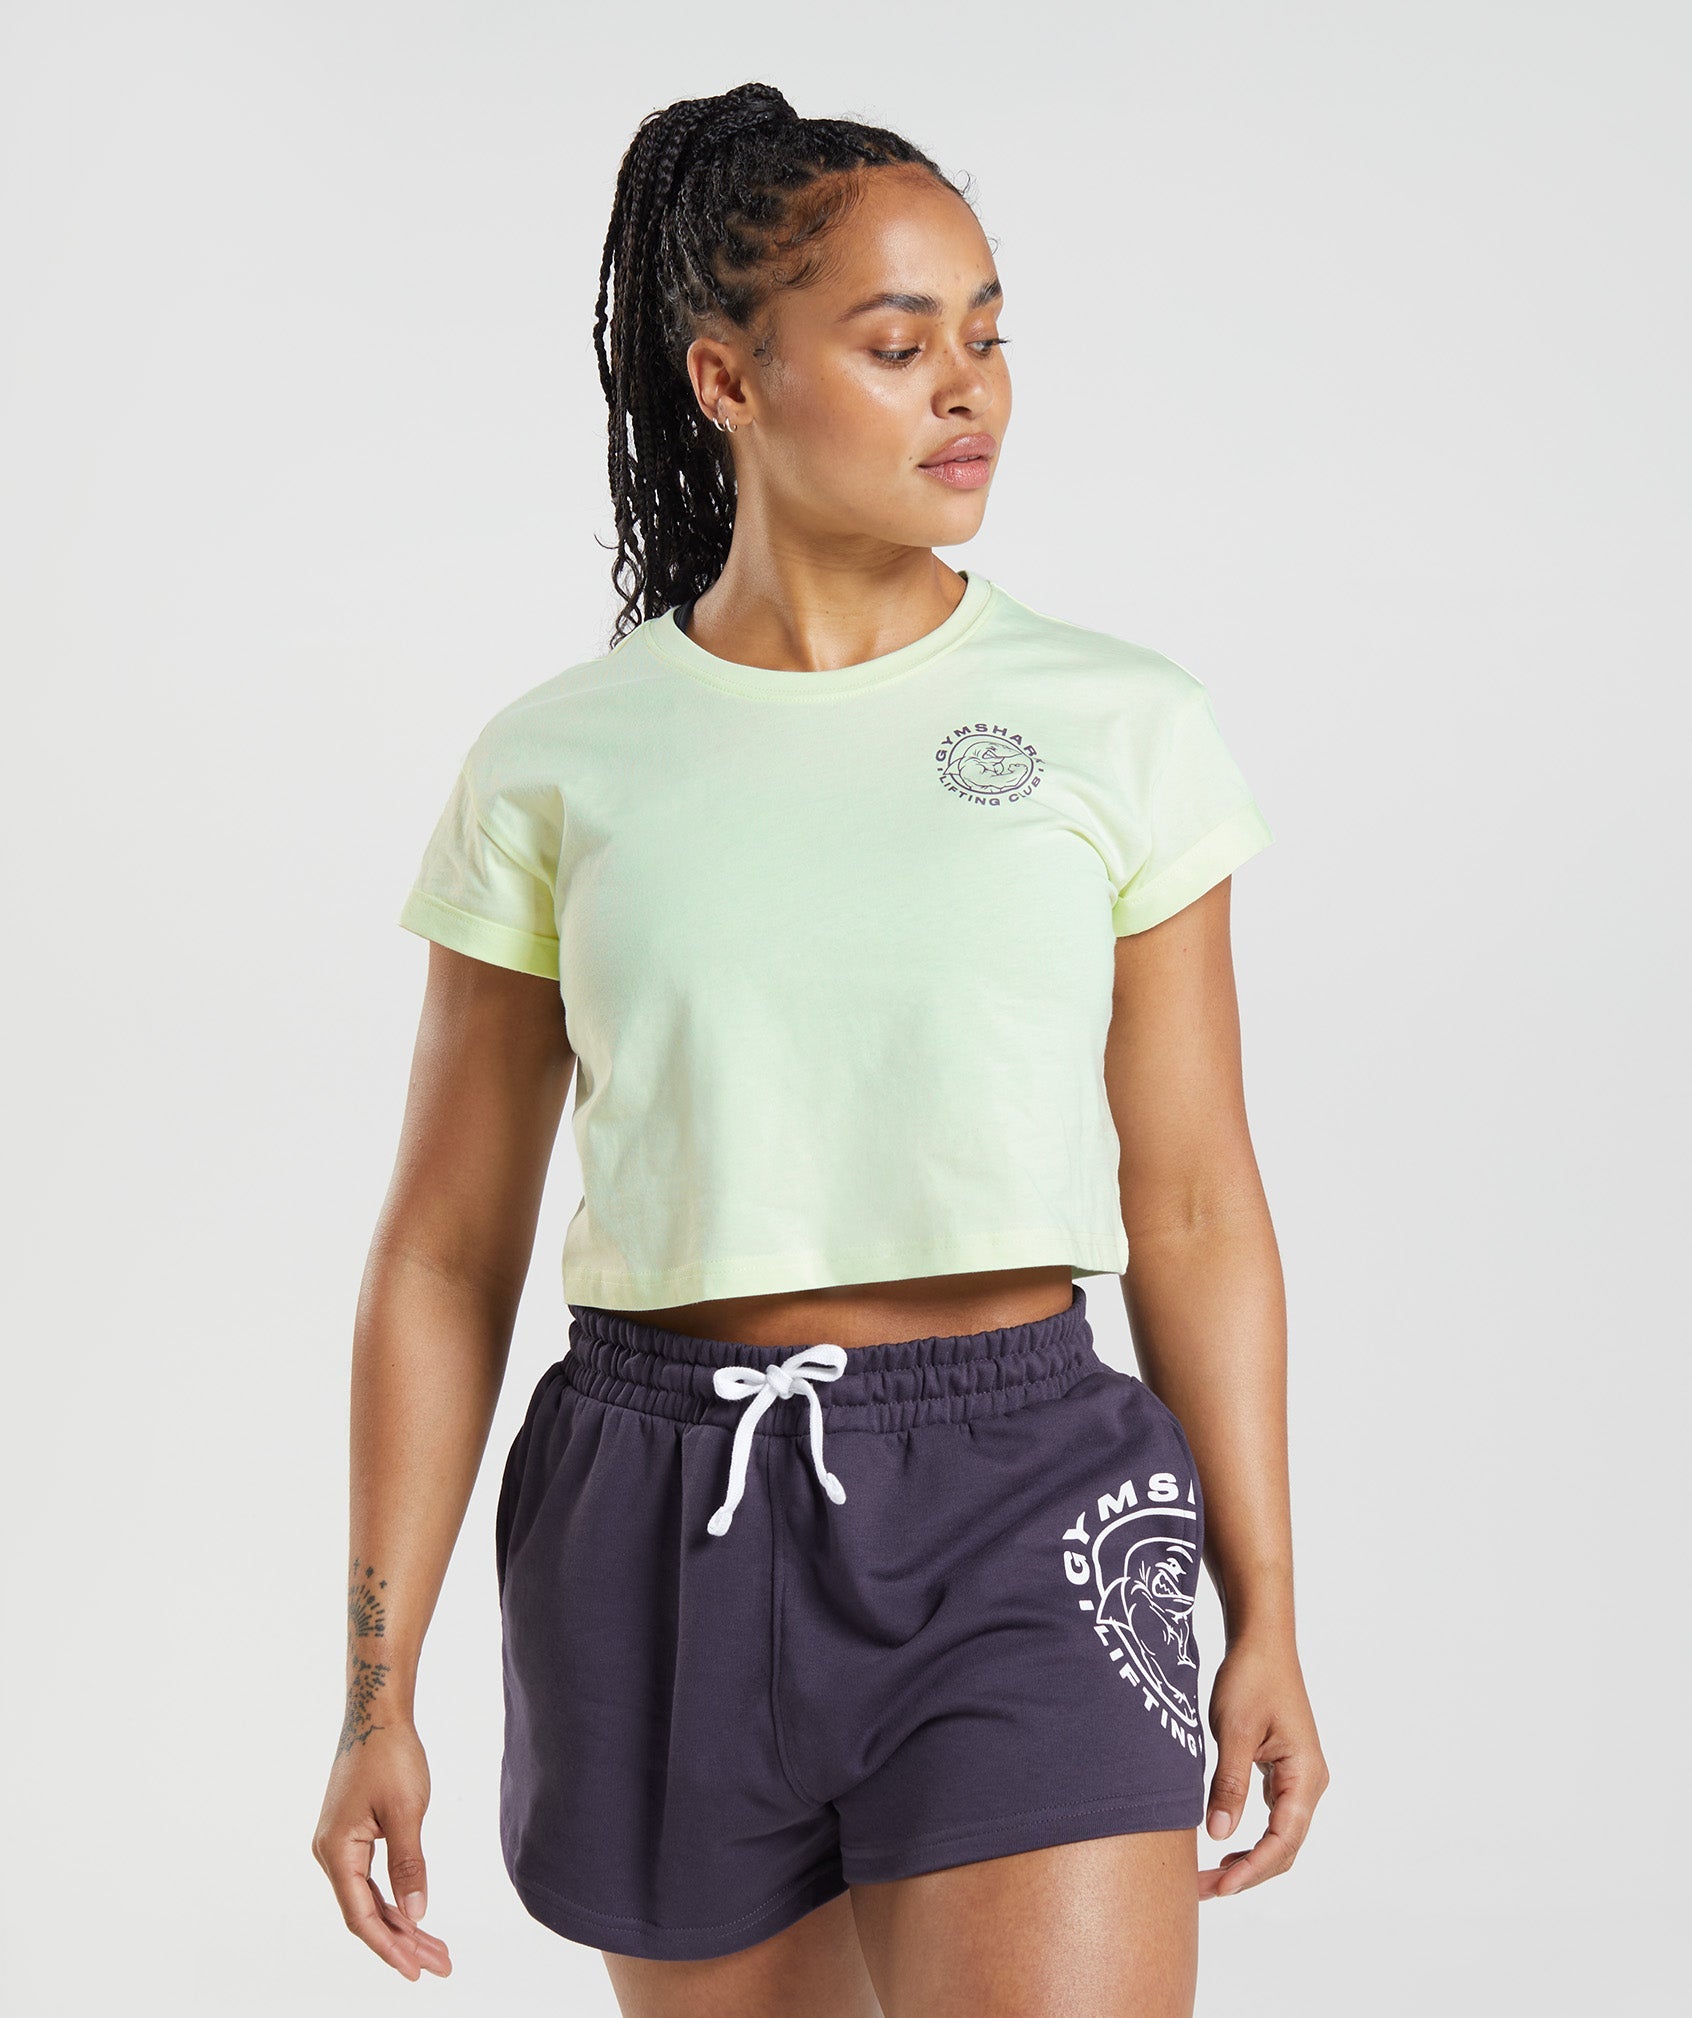 Legacy Crop Top in Cucumber Green - view 1